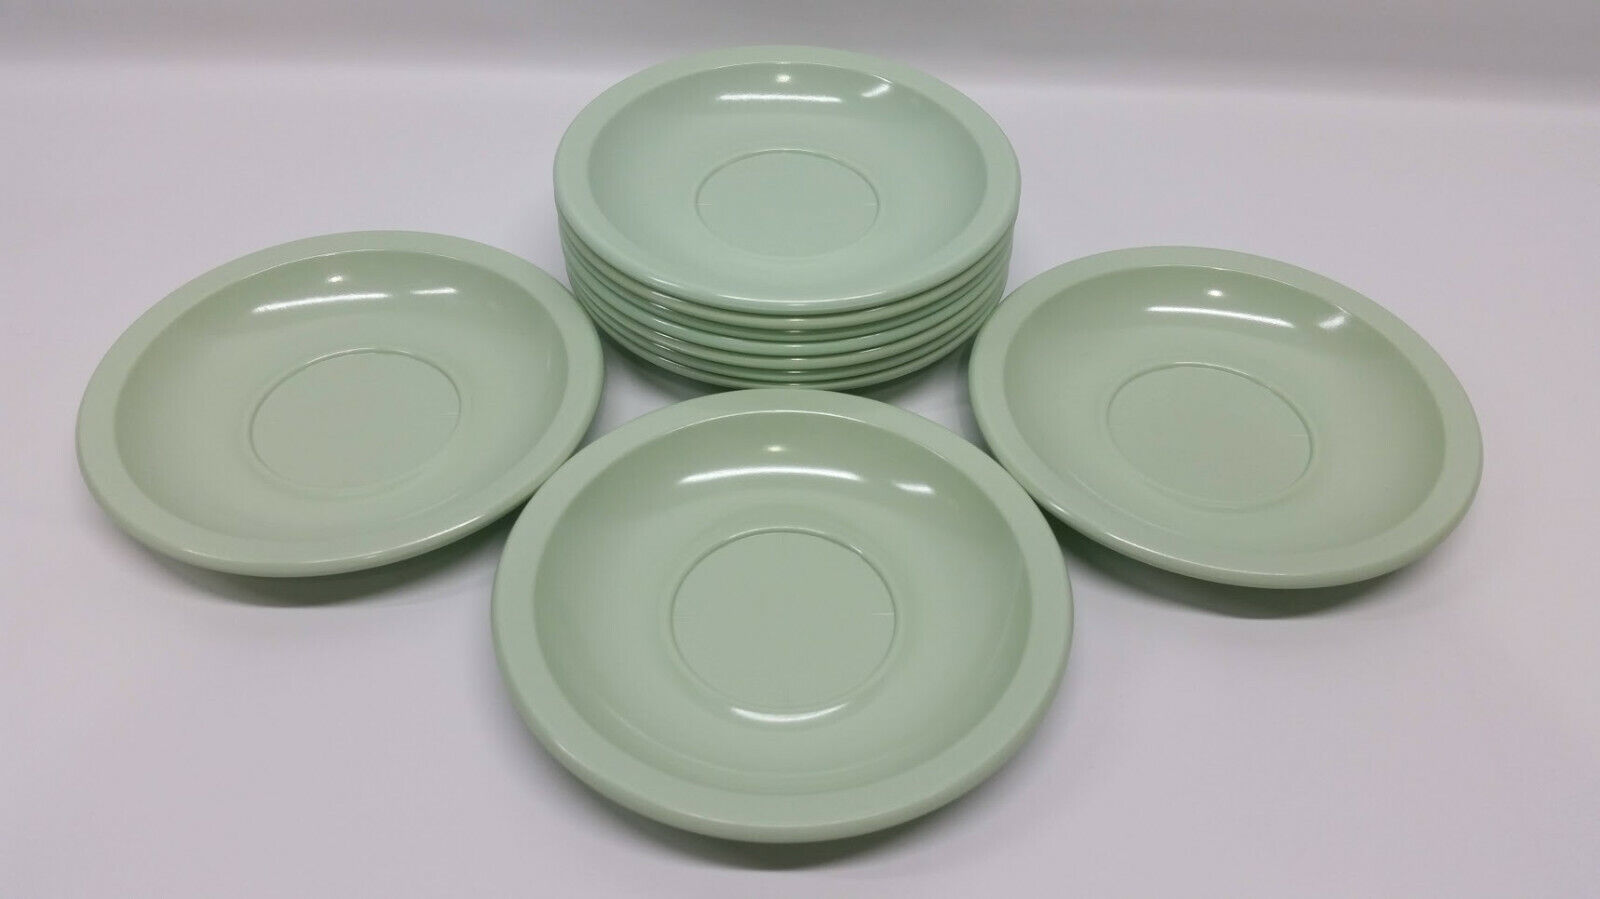 Vintage Arrowhead Ware Mint Green Melmac Saucers Plate Lot of 10 NOS